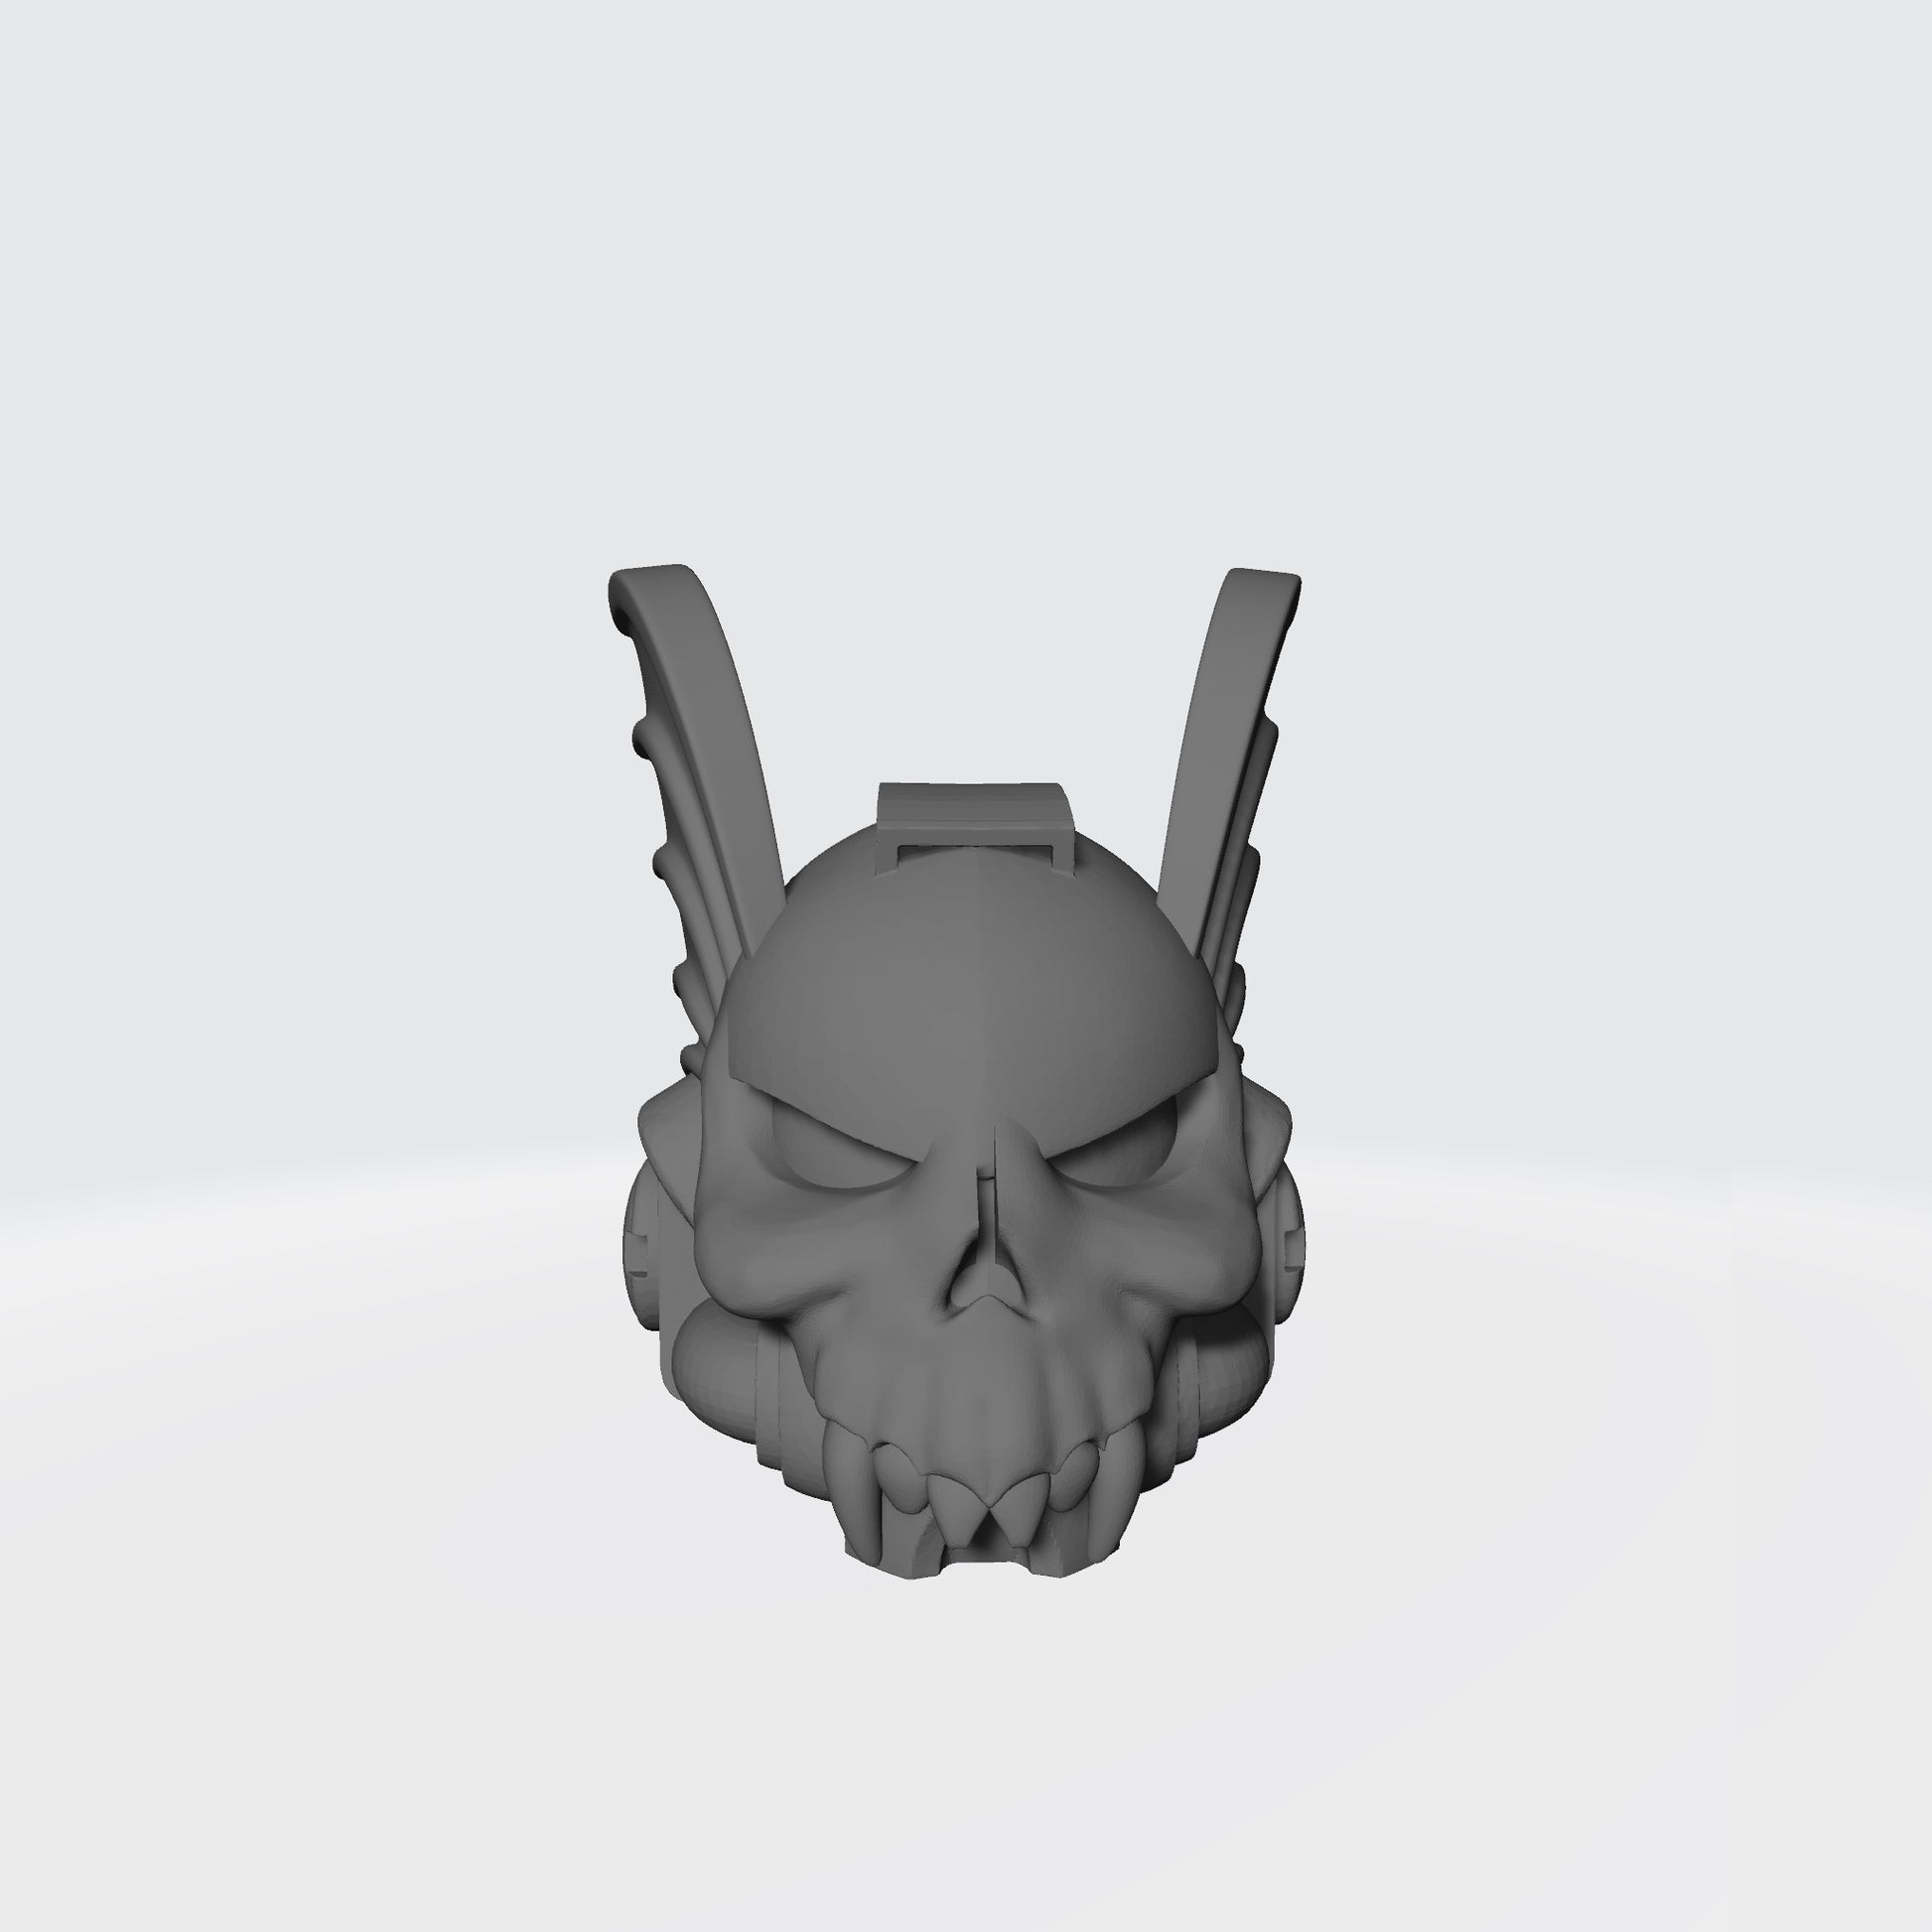 Night Lords Winged Skull Helmet Compatible with McFarlane Toys Space Marines Warhammer 40K VIIIth Legion desinged by Fantasy World Games